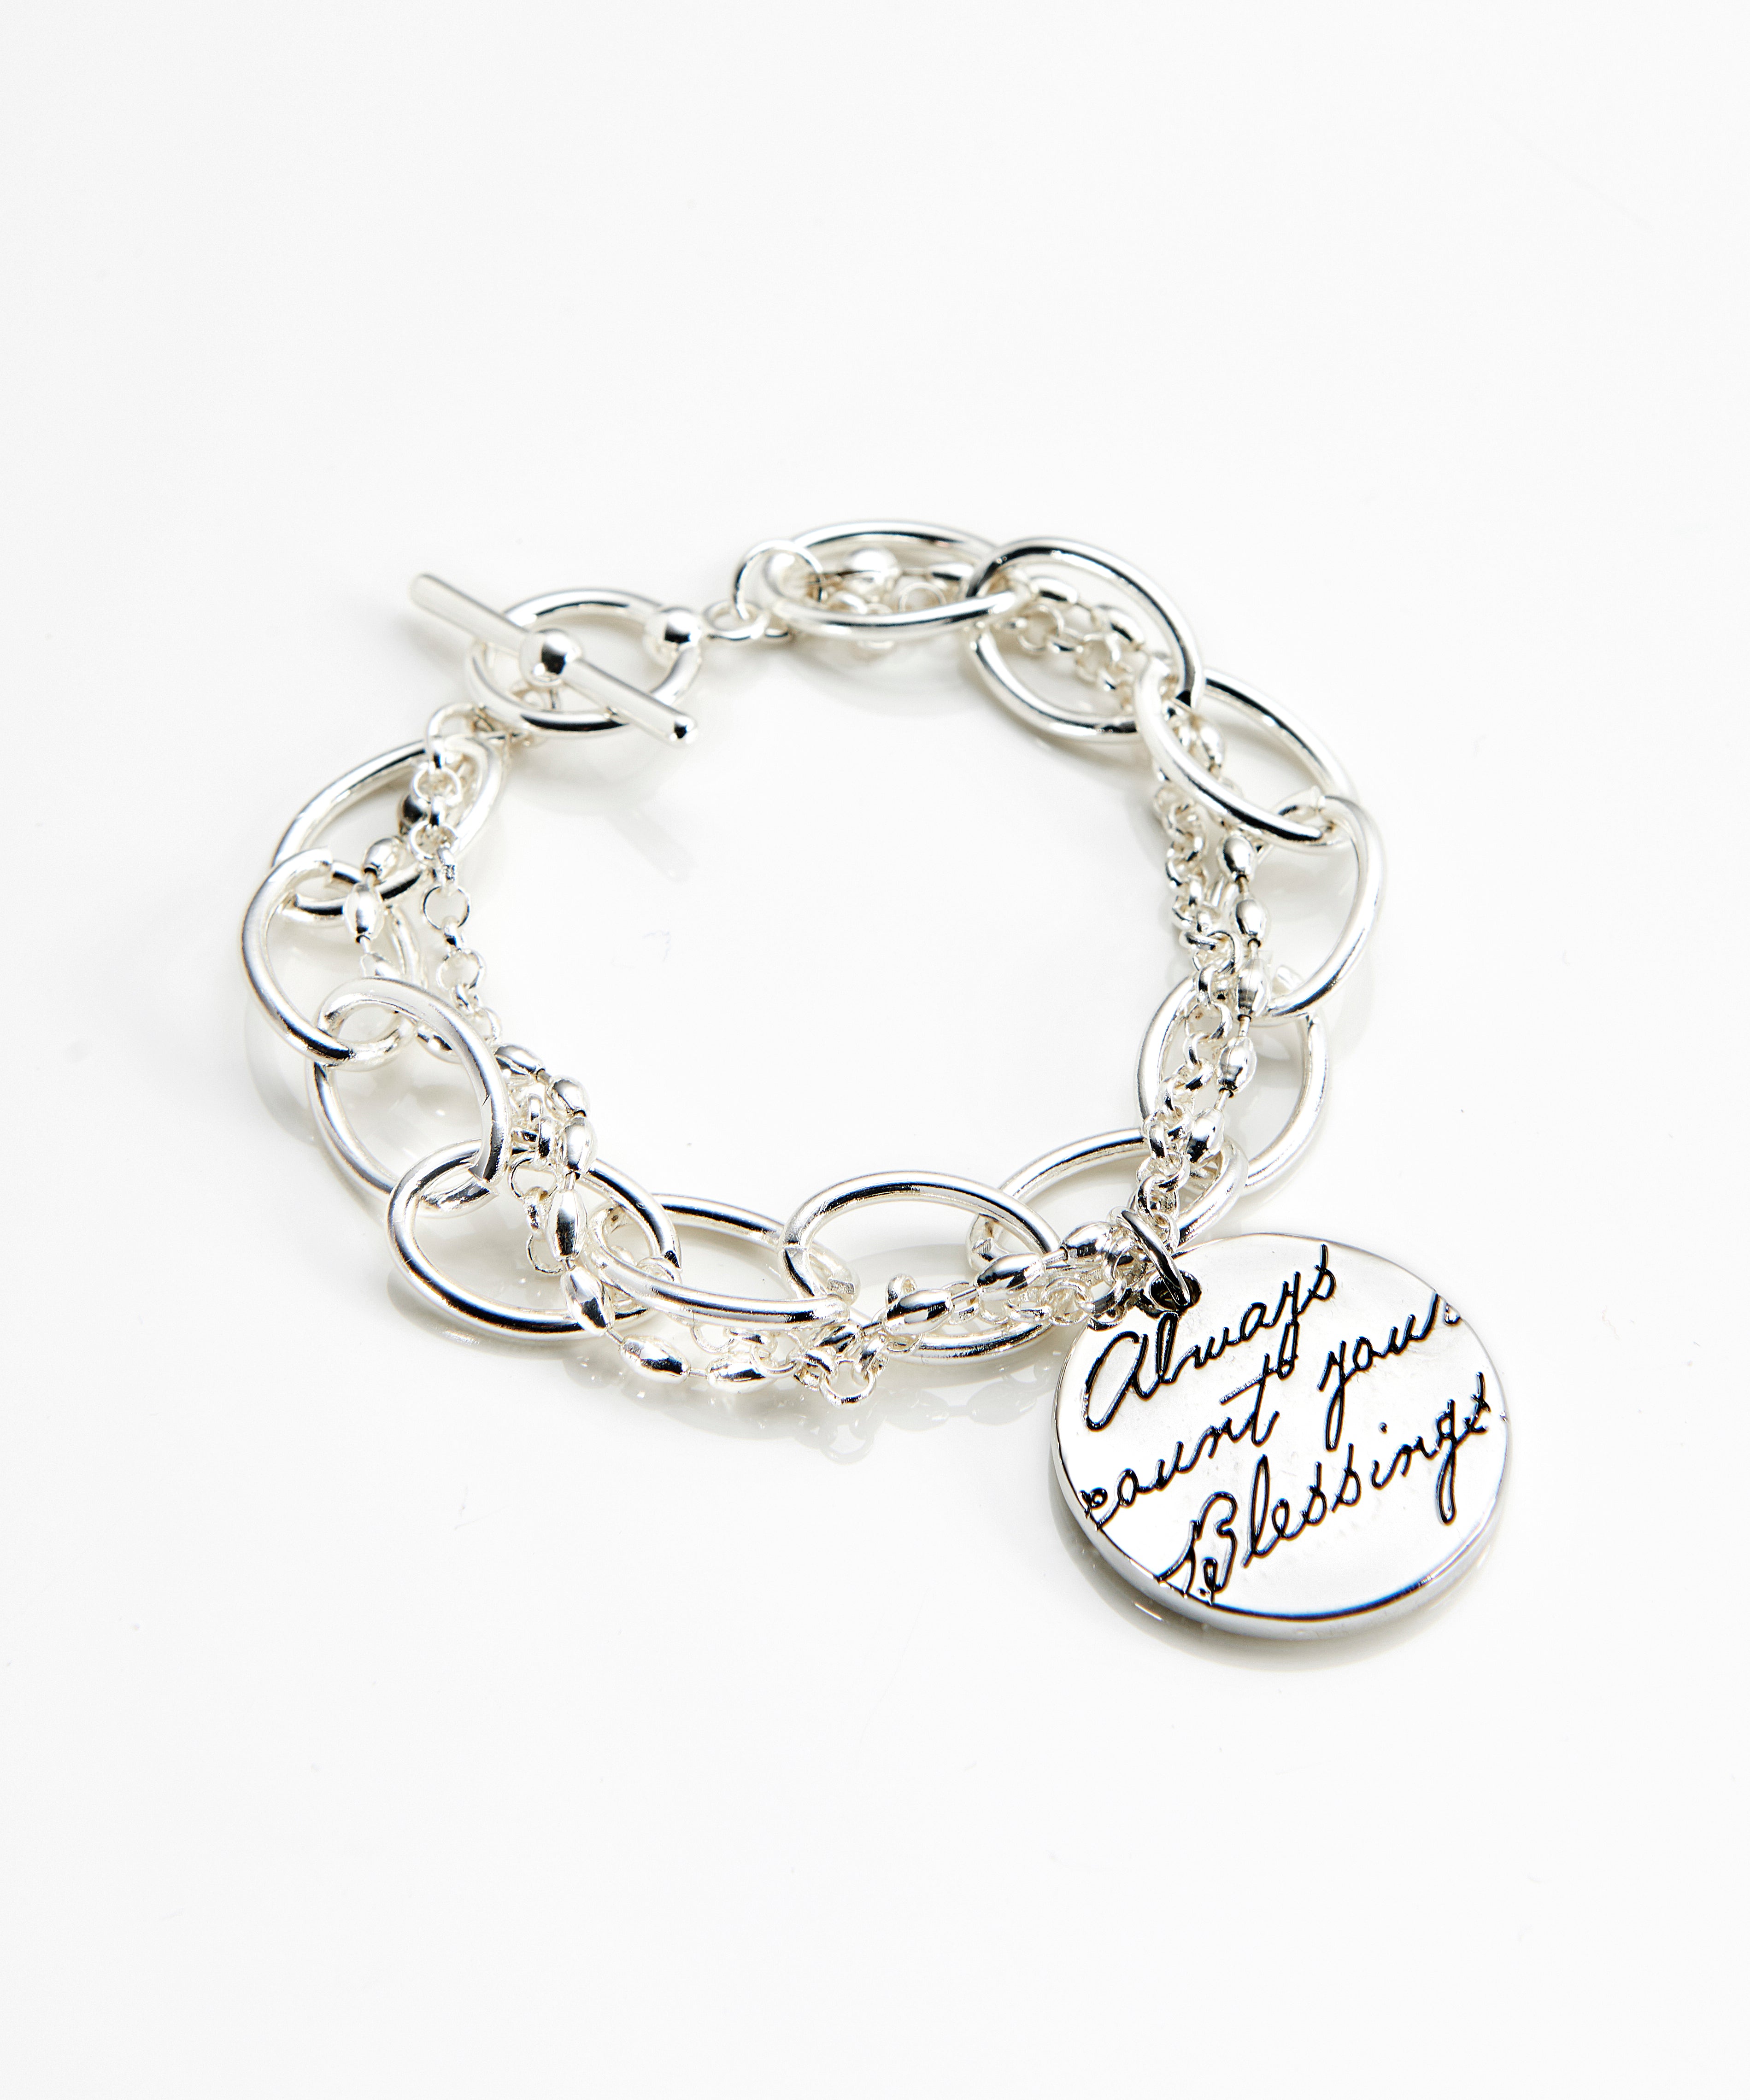 Always Count Your Blessings Toggle Link Bracelet